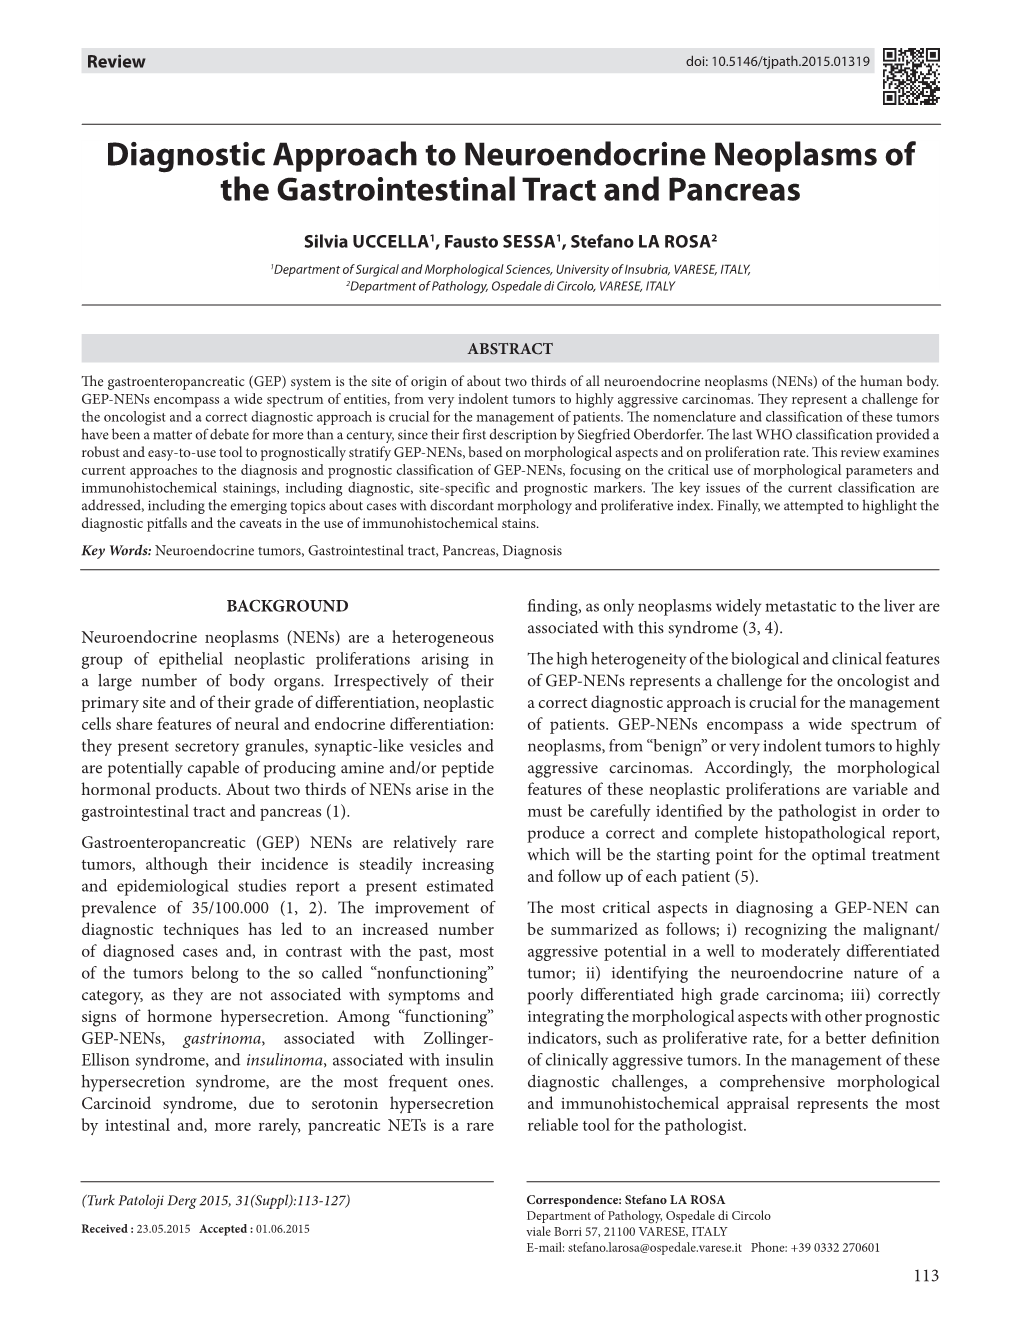 Diagnostic Approach to Neuroendocrine Neoplasms of the Gastrointestinal Tract and Pancreas